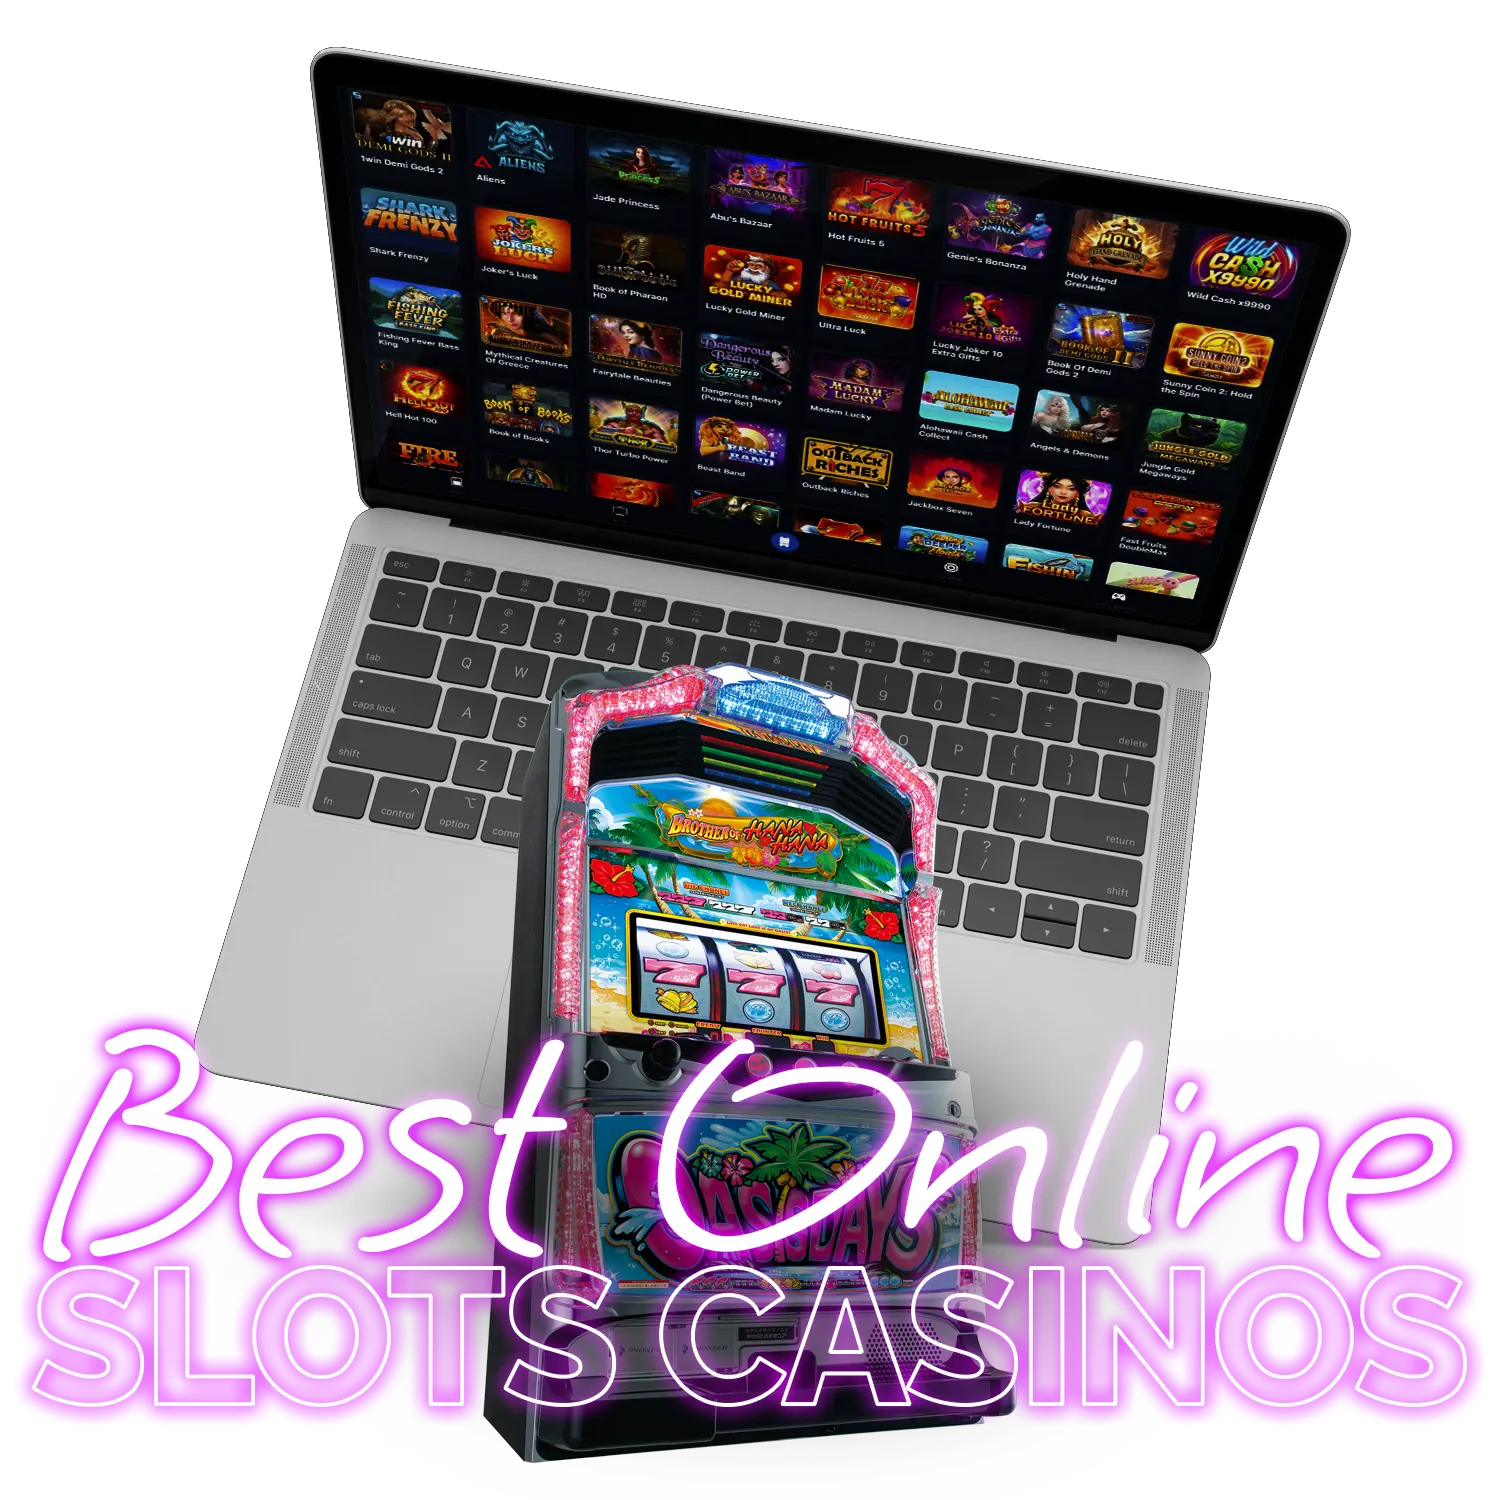 Play new slot games and win.